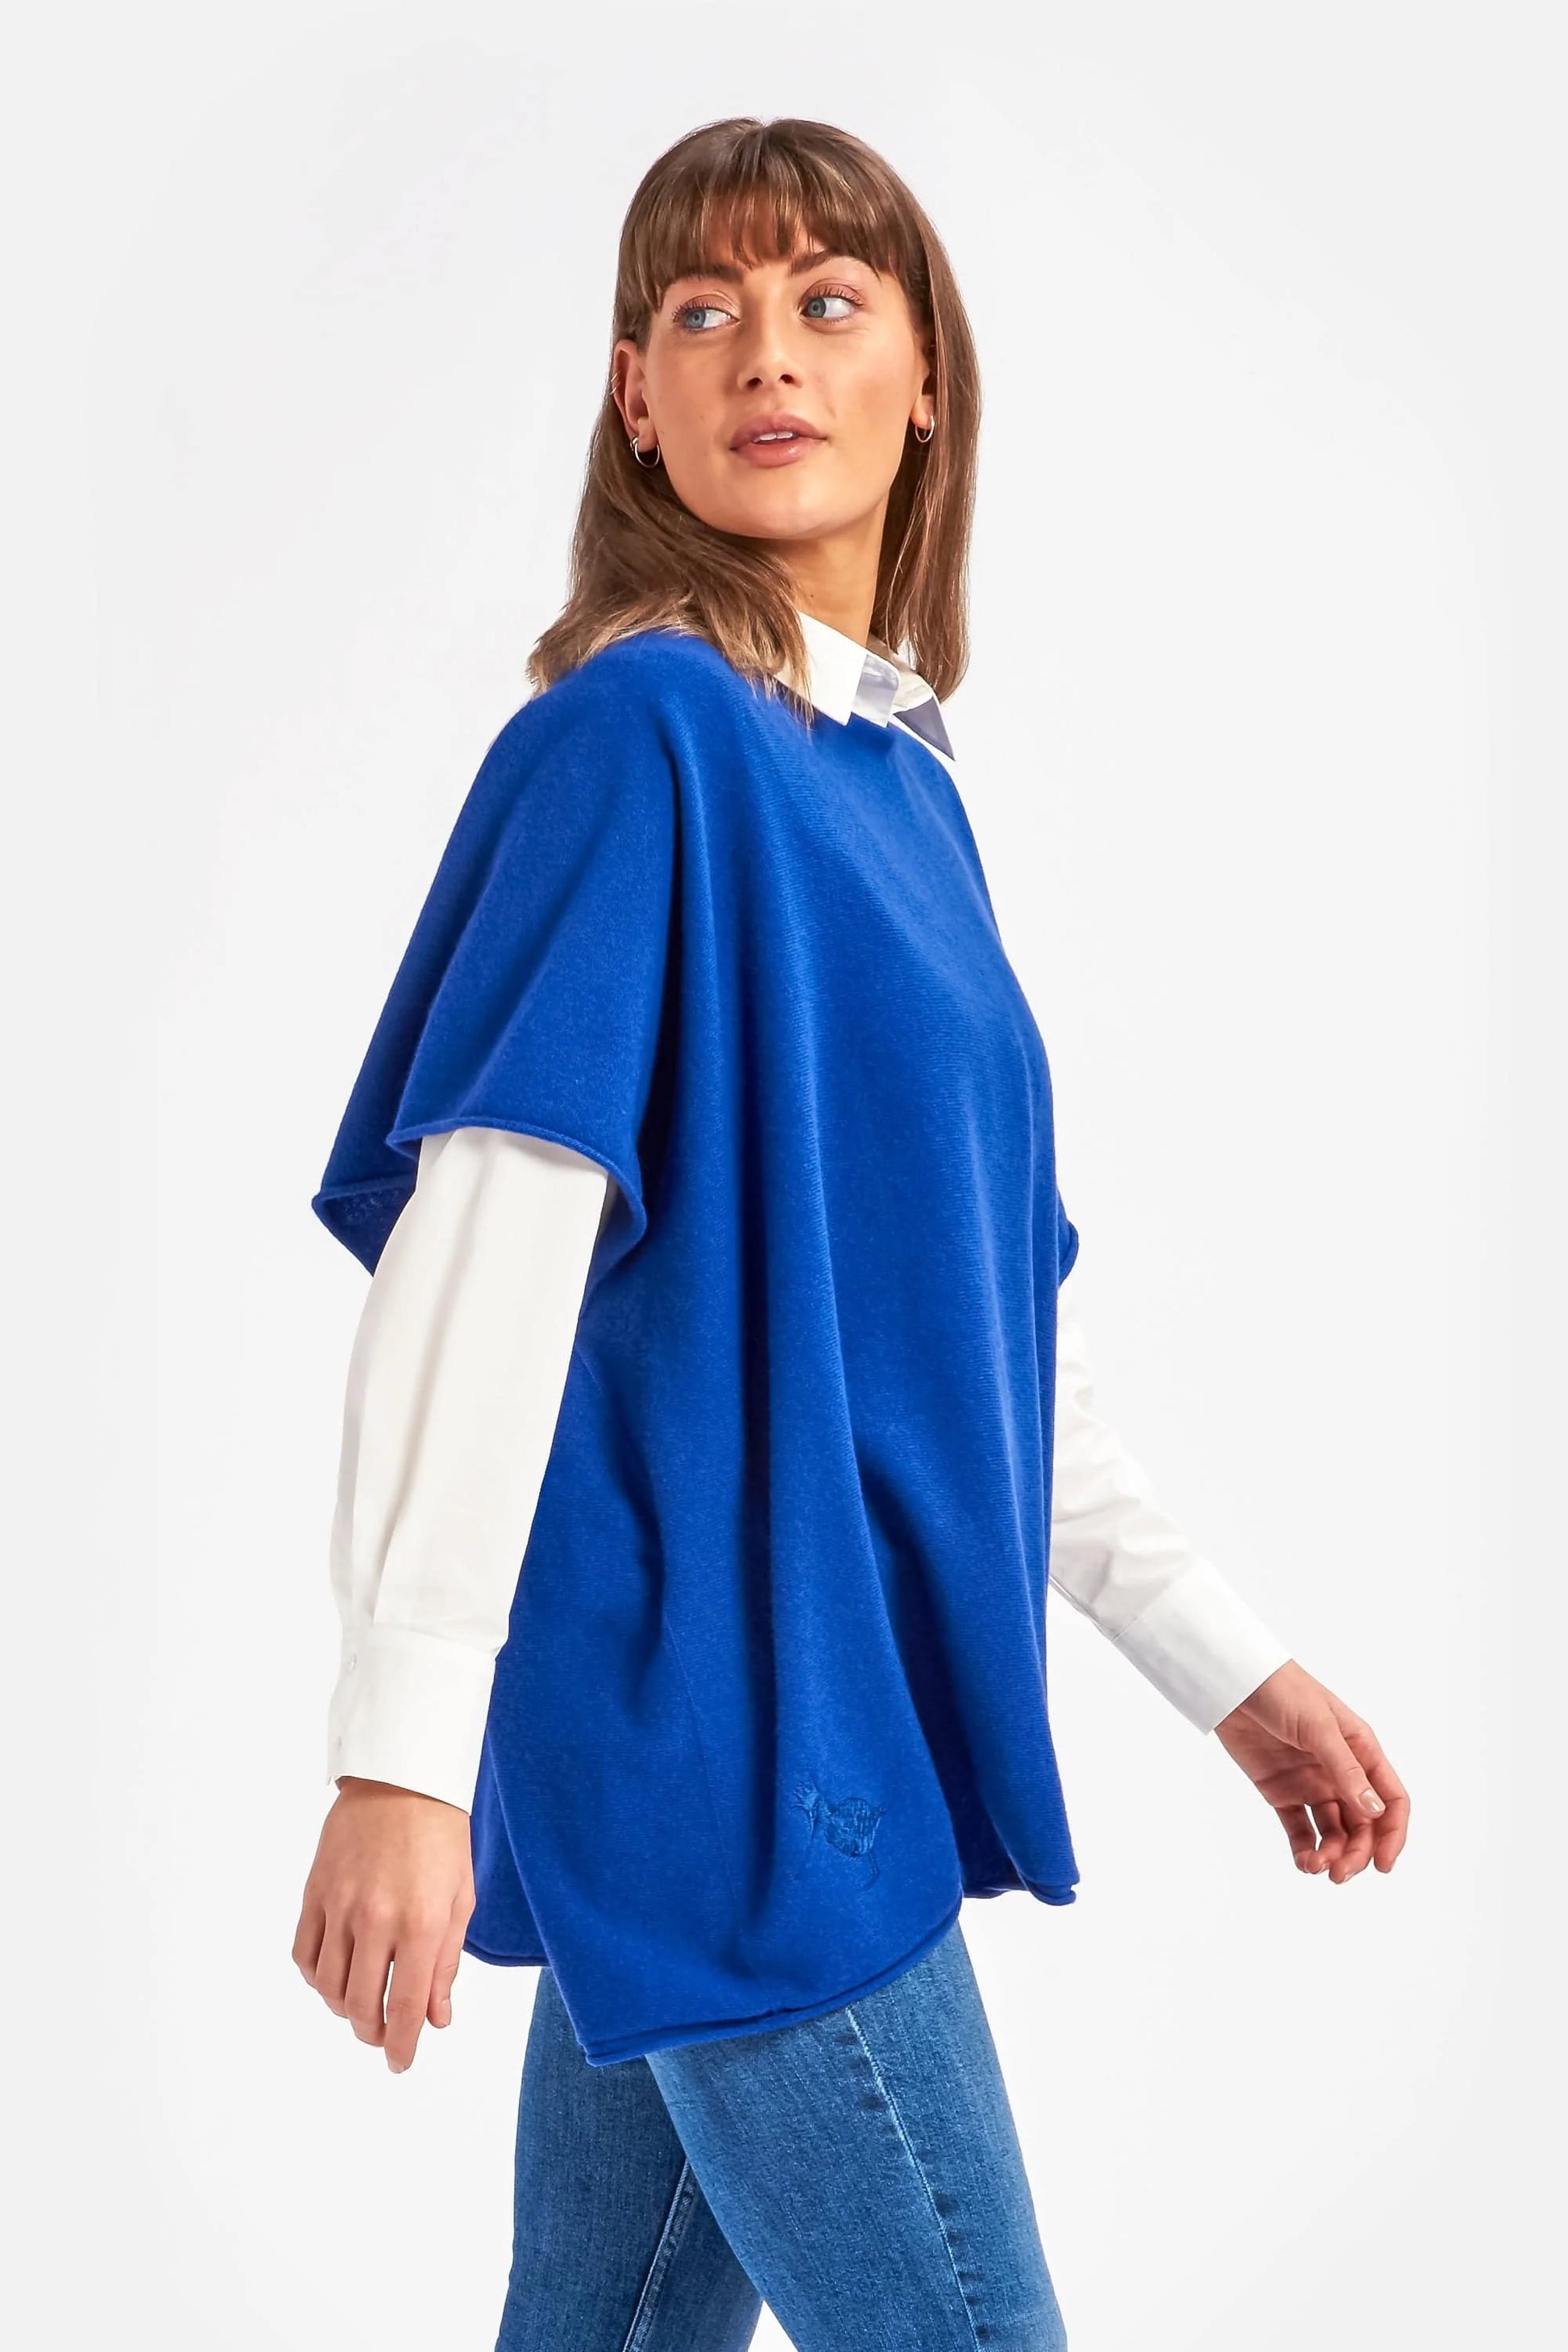 Cashmere & Merino Wool Boat Neck Poncho in Cobalt Blue By Woodcock & Cavendish for sale - Woodcock and Cavendish